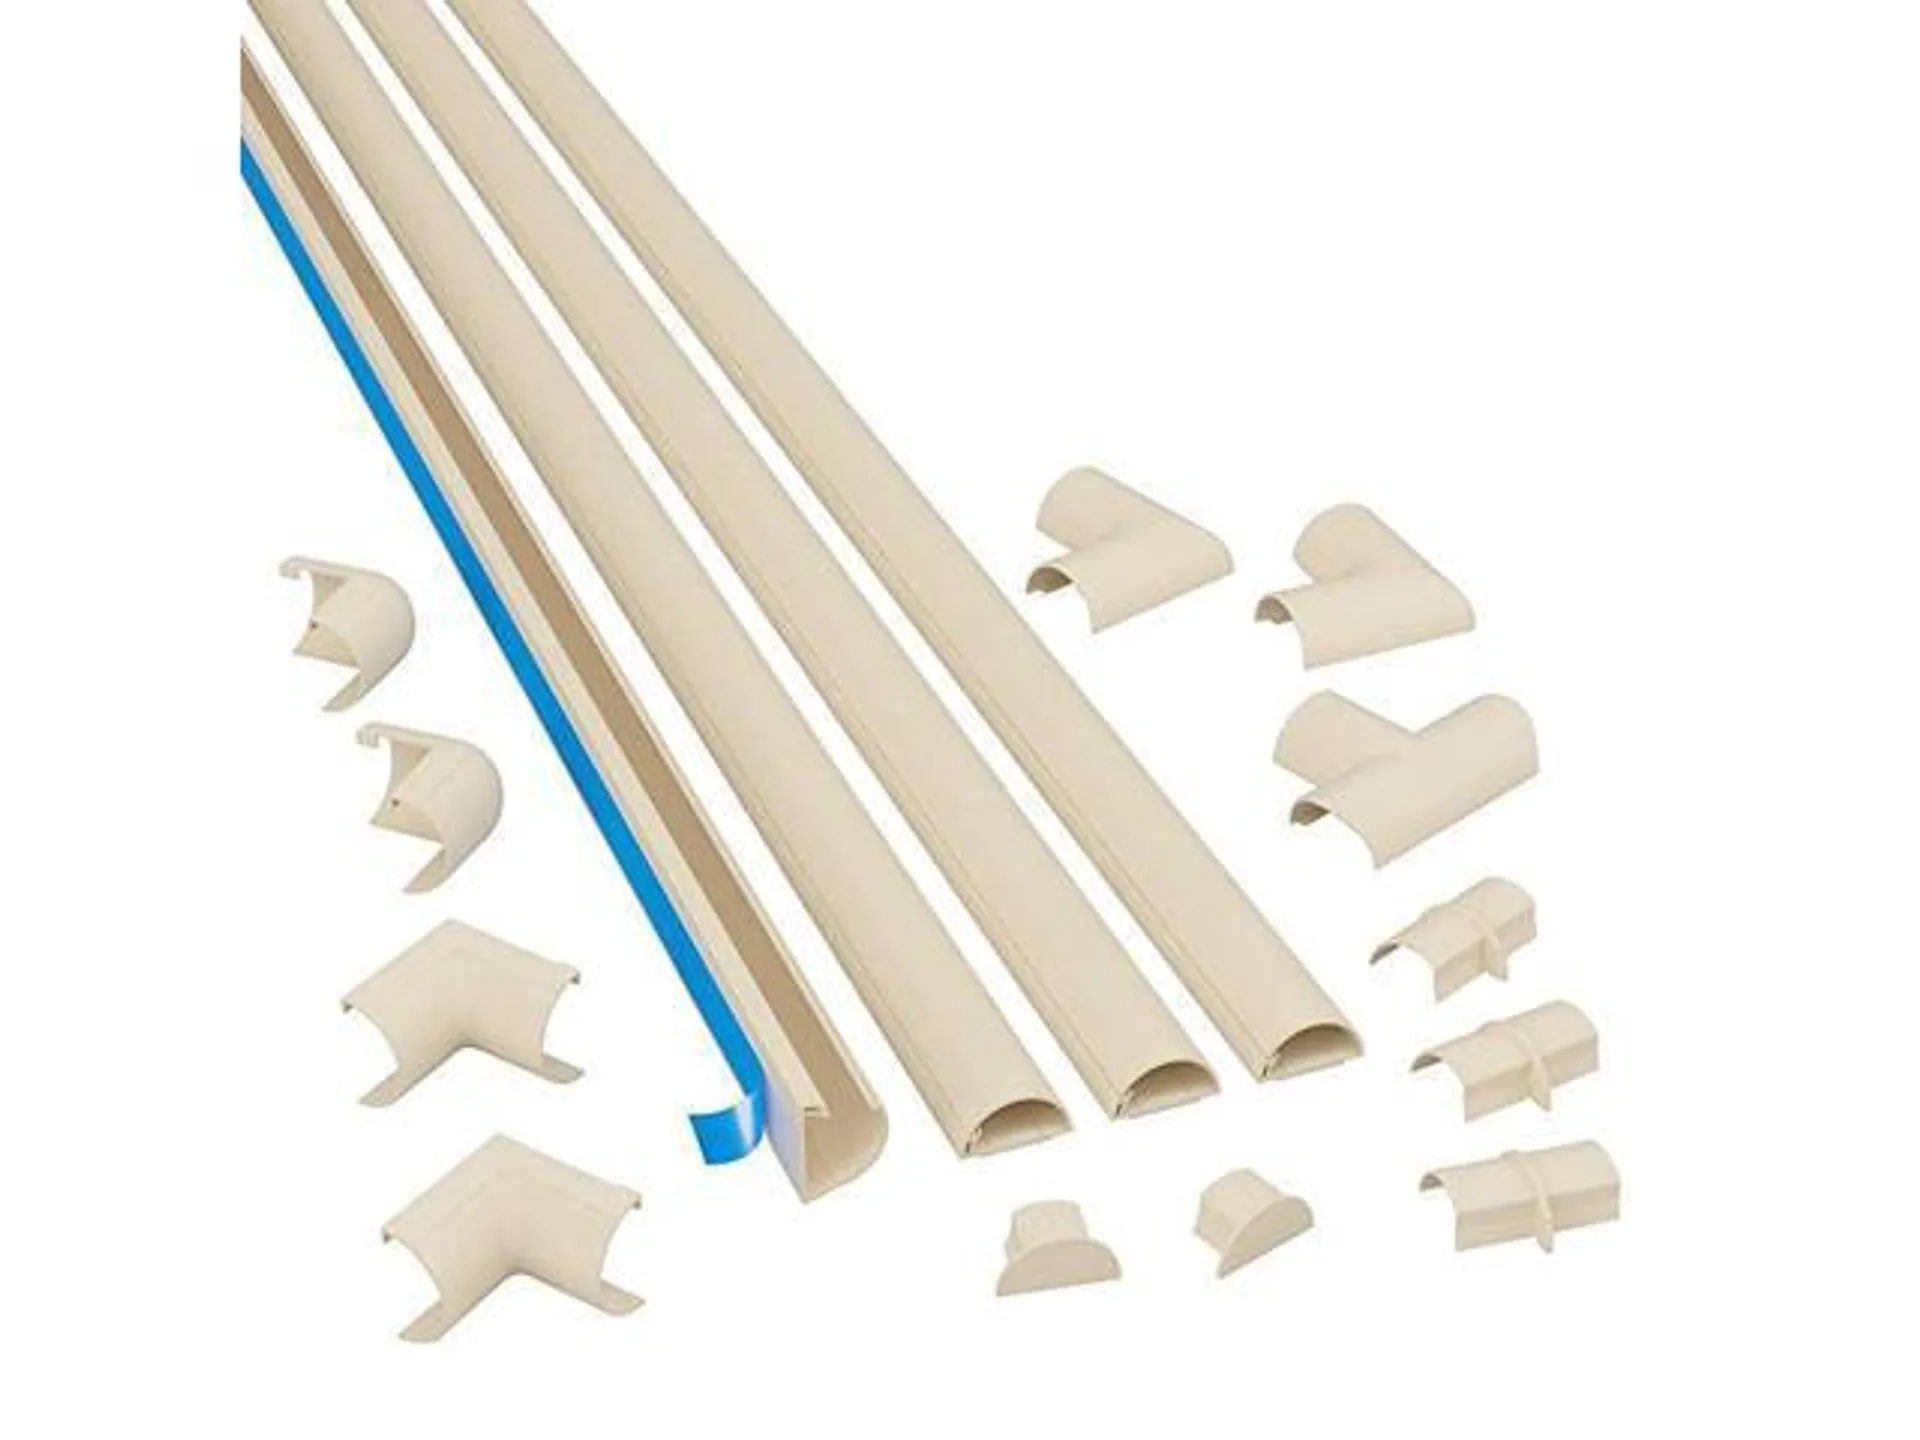 Beige Medium Cord Cover Kit 13FT SelfAdhesive Wire Hider Cable Raceway to Hide Wires on Wall Cable Management 4 x 39in Lengths and Accessories